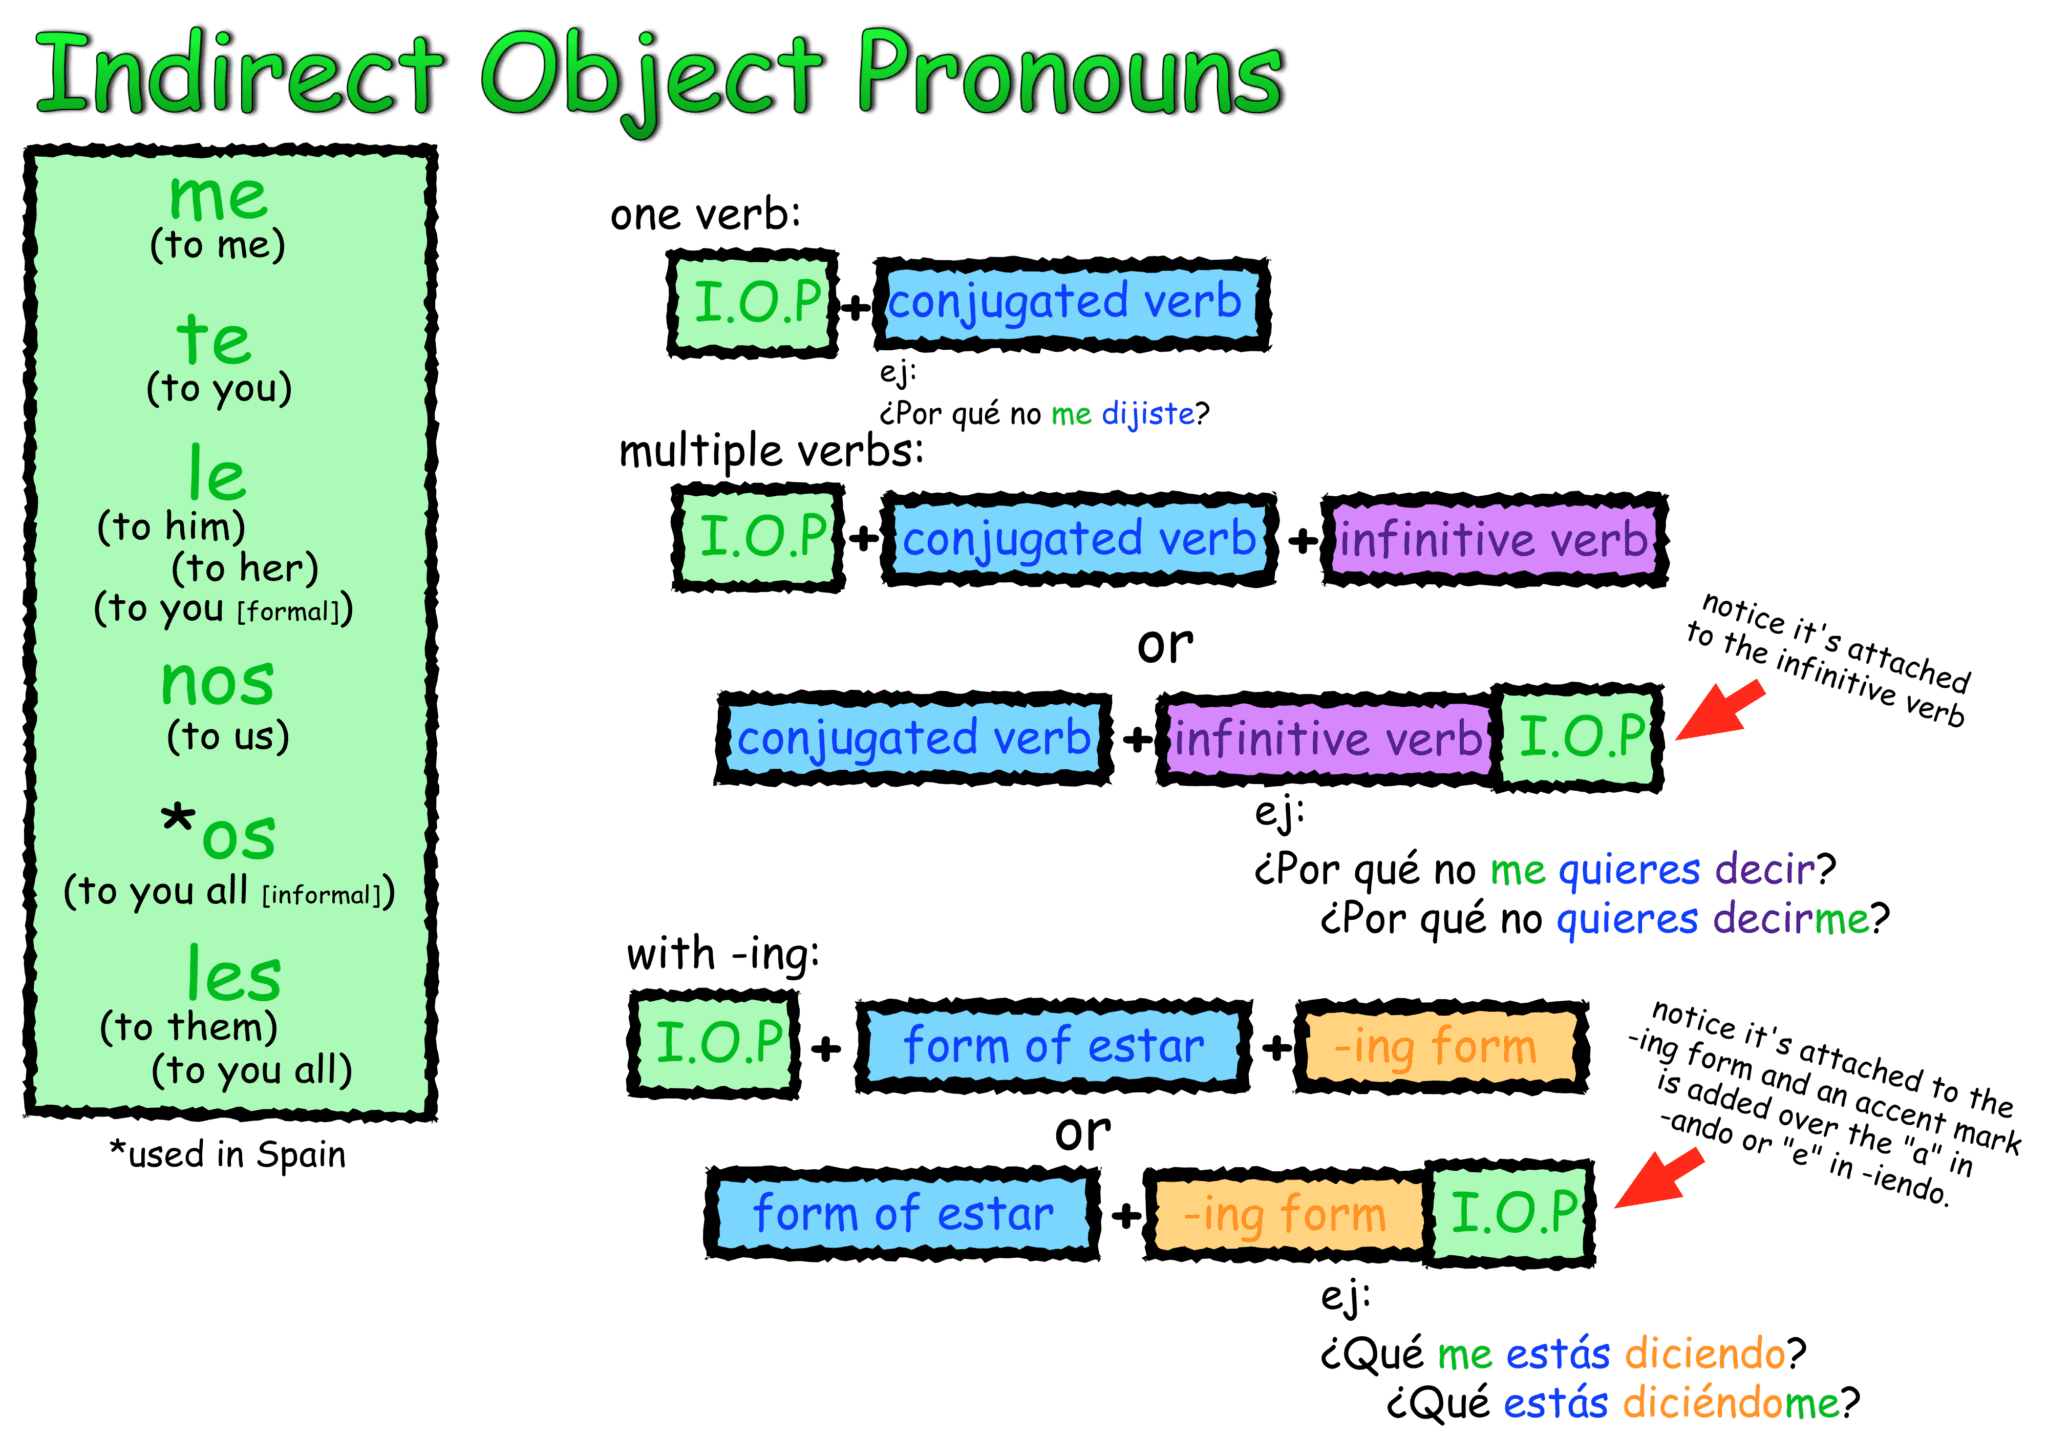 Direct Object Pronouns Spanish Sentence Examples